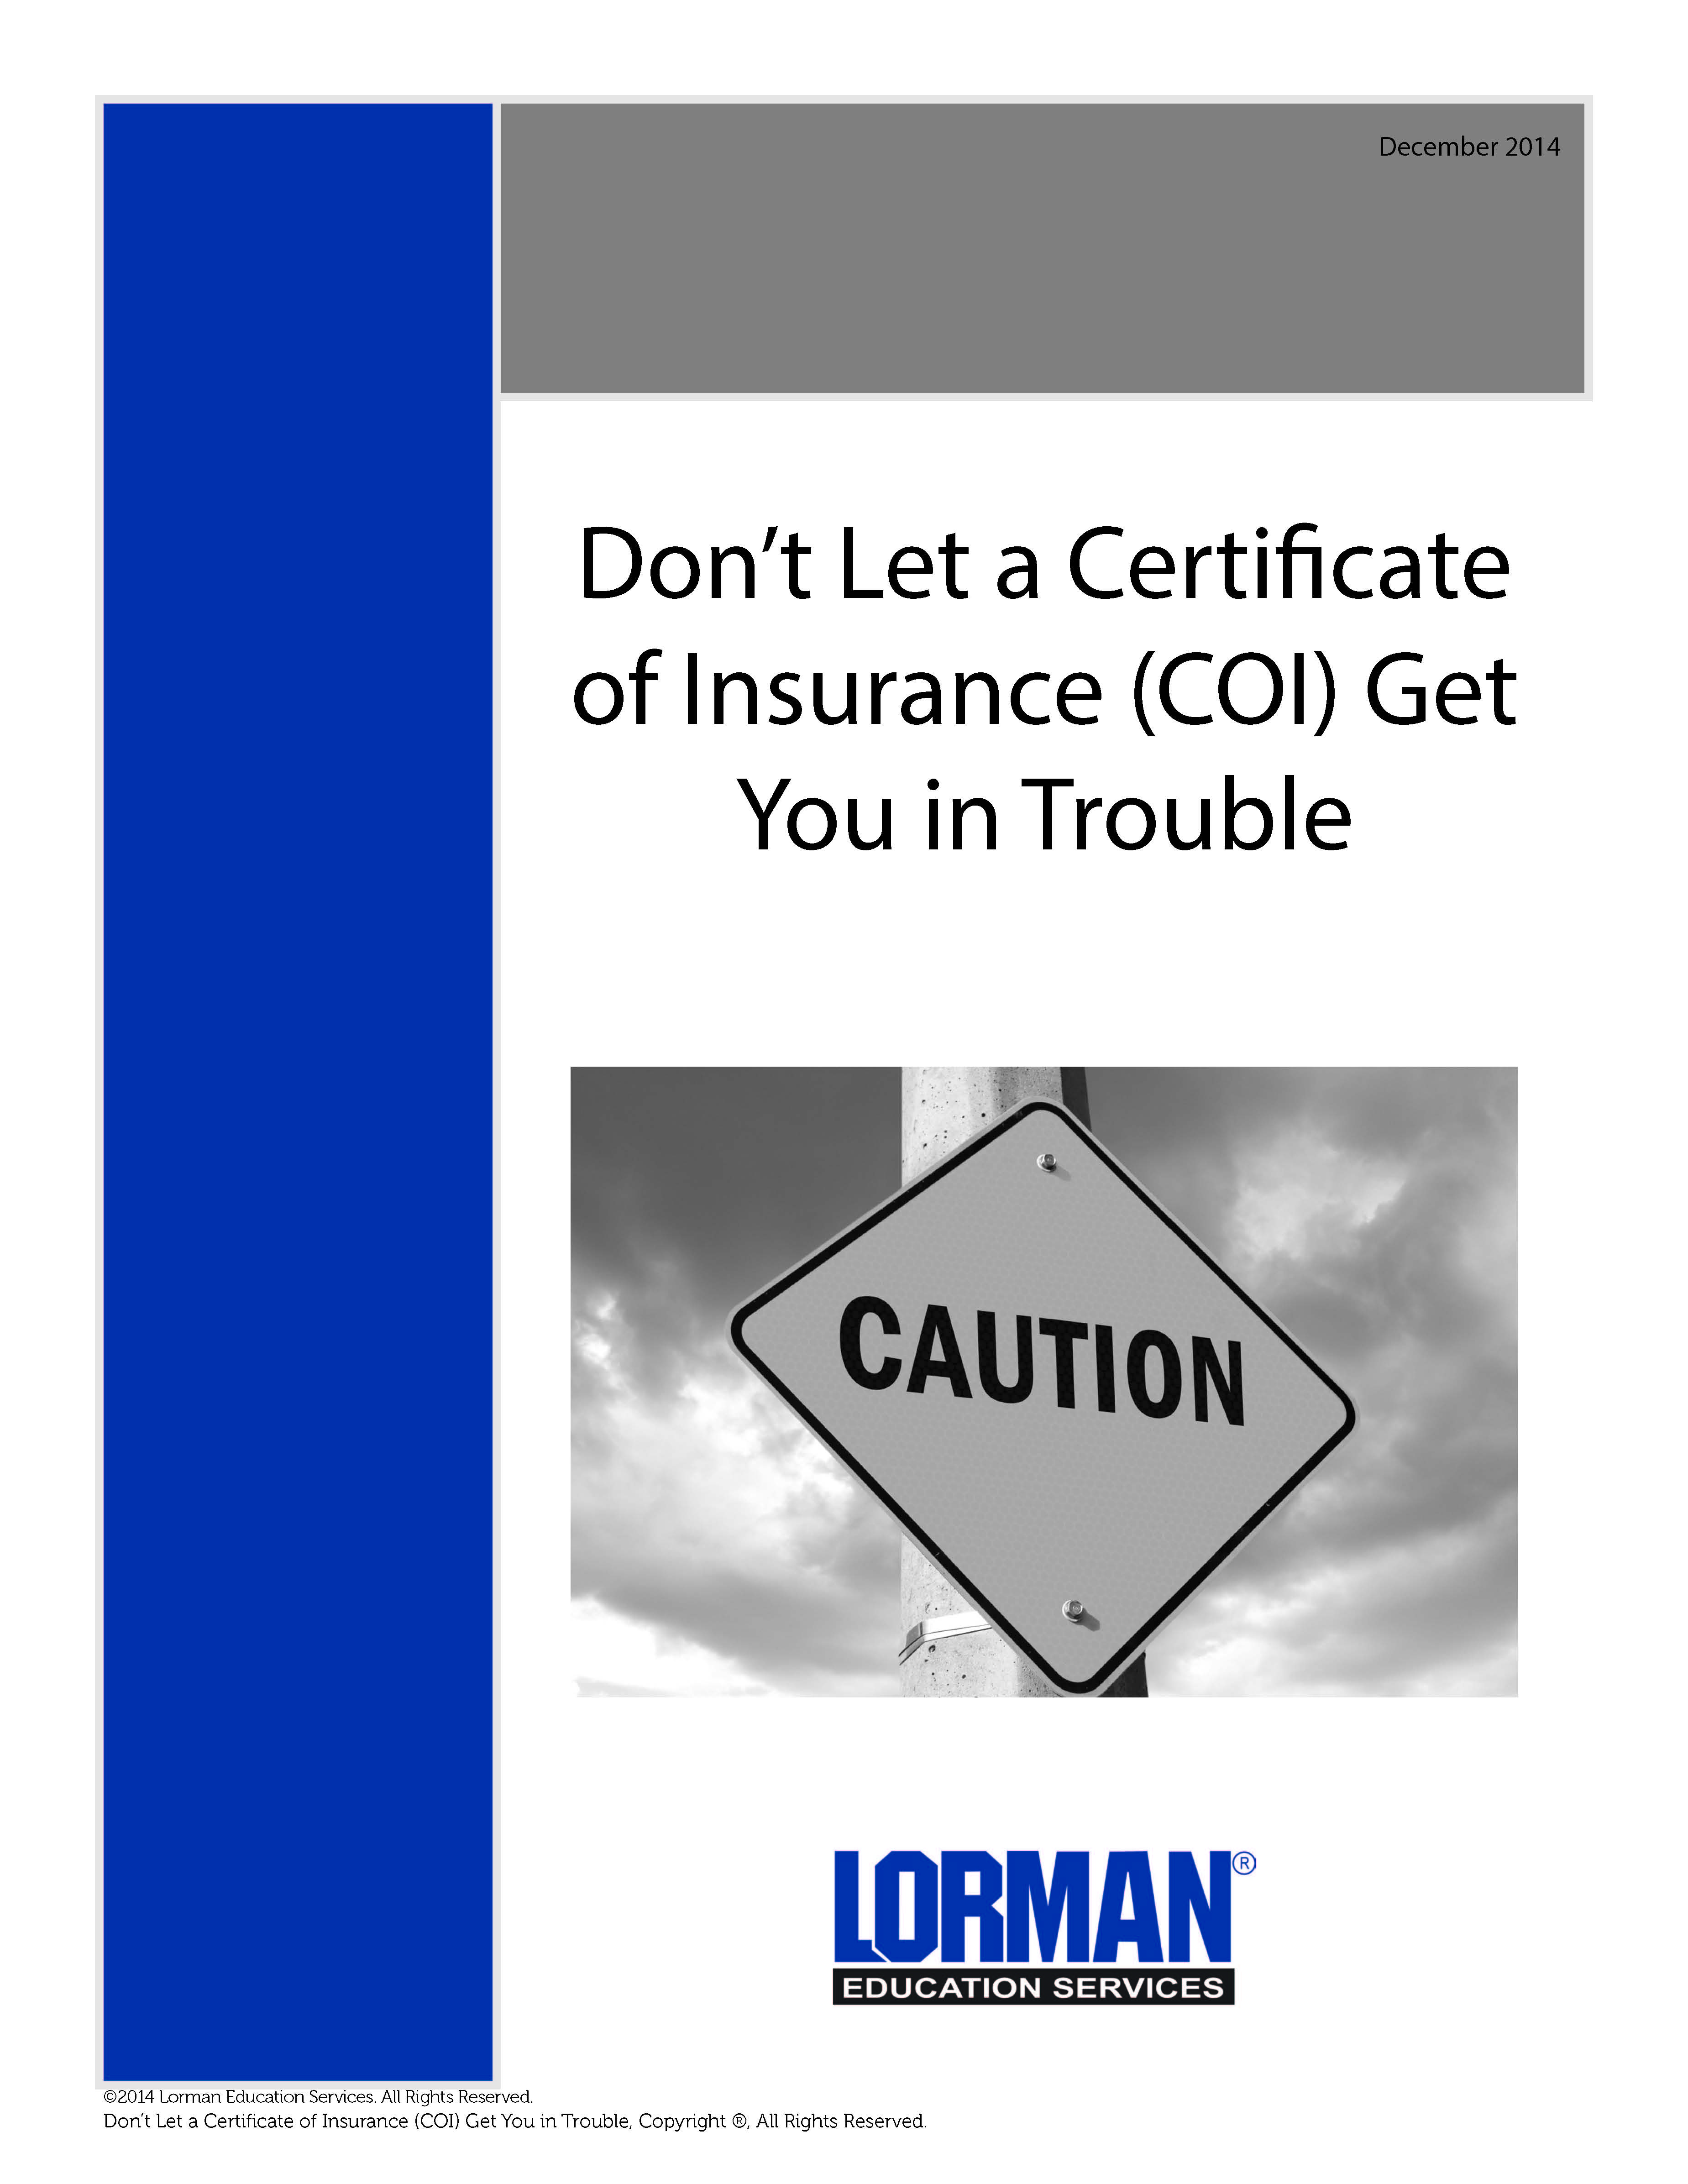 Don’t Let a Certificate of Insurance (COI) Get You in Trouble